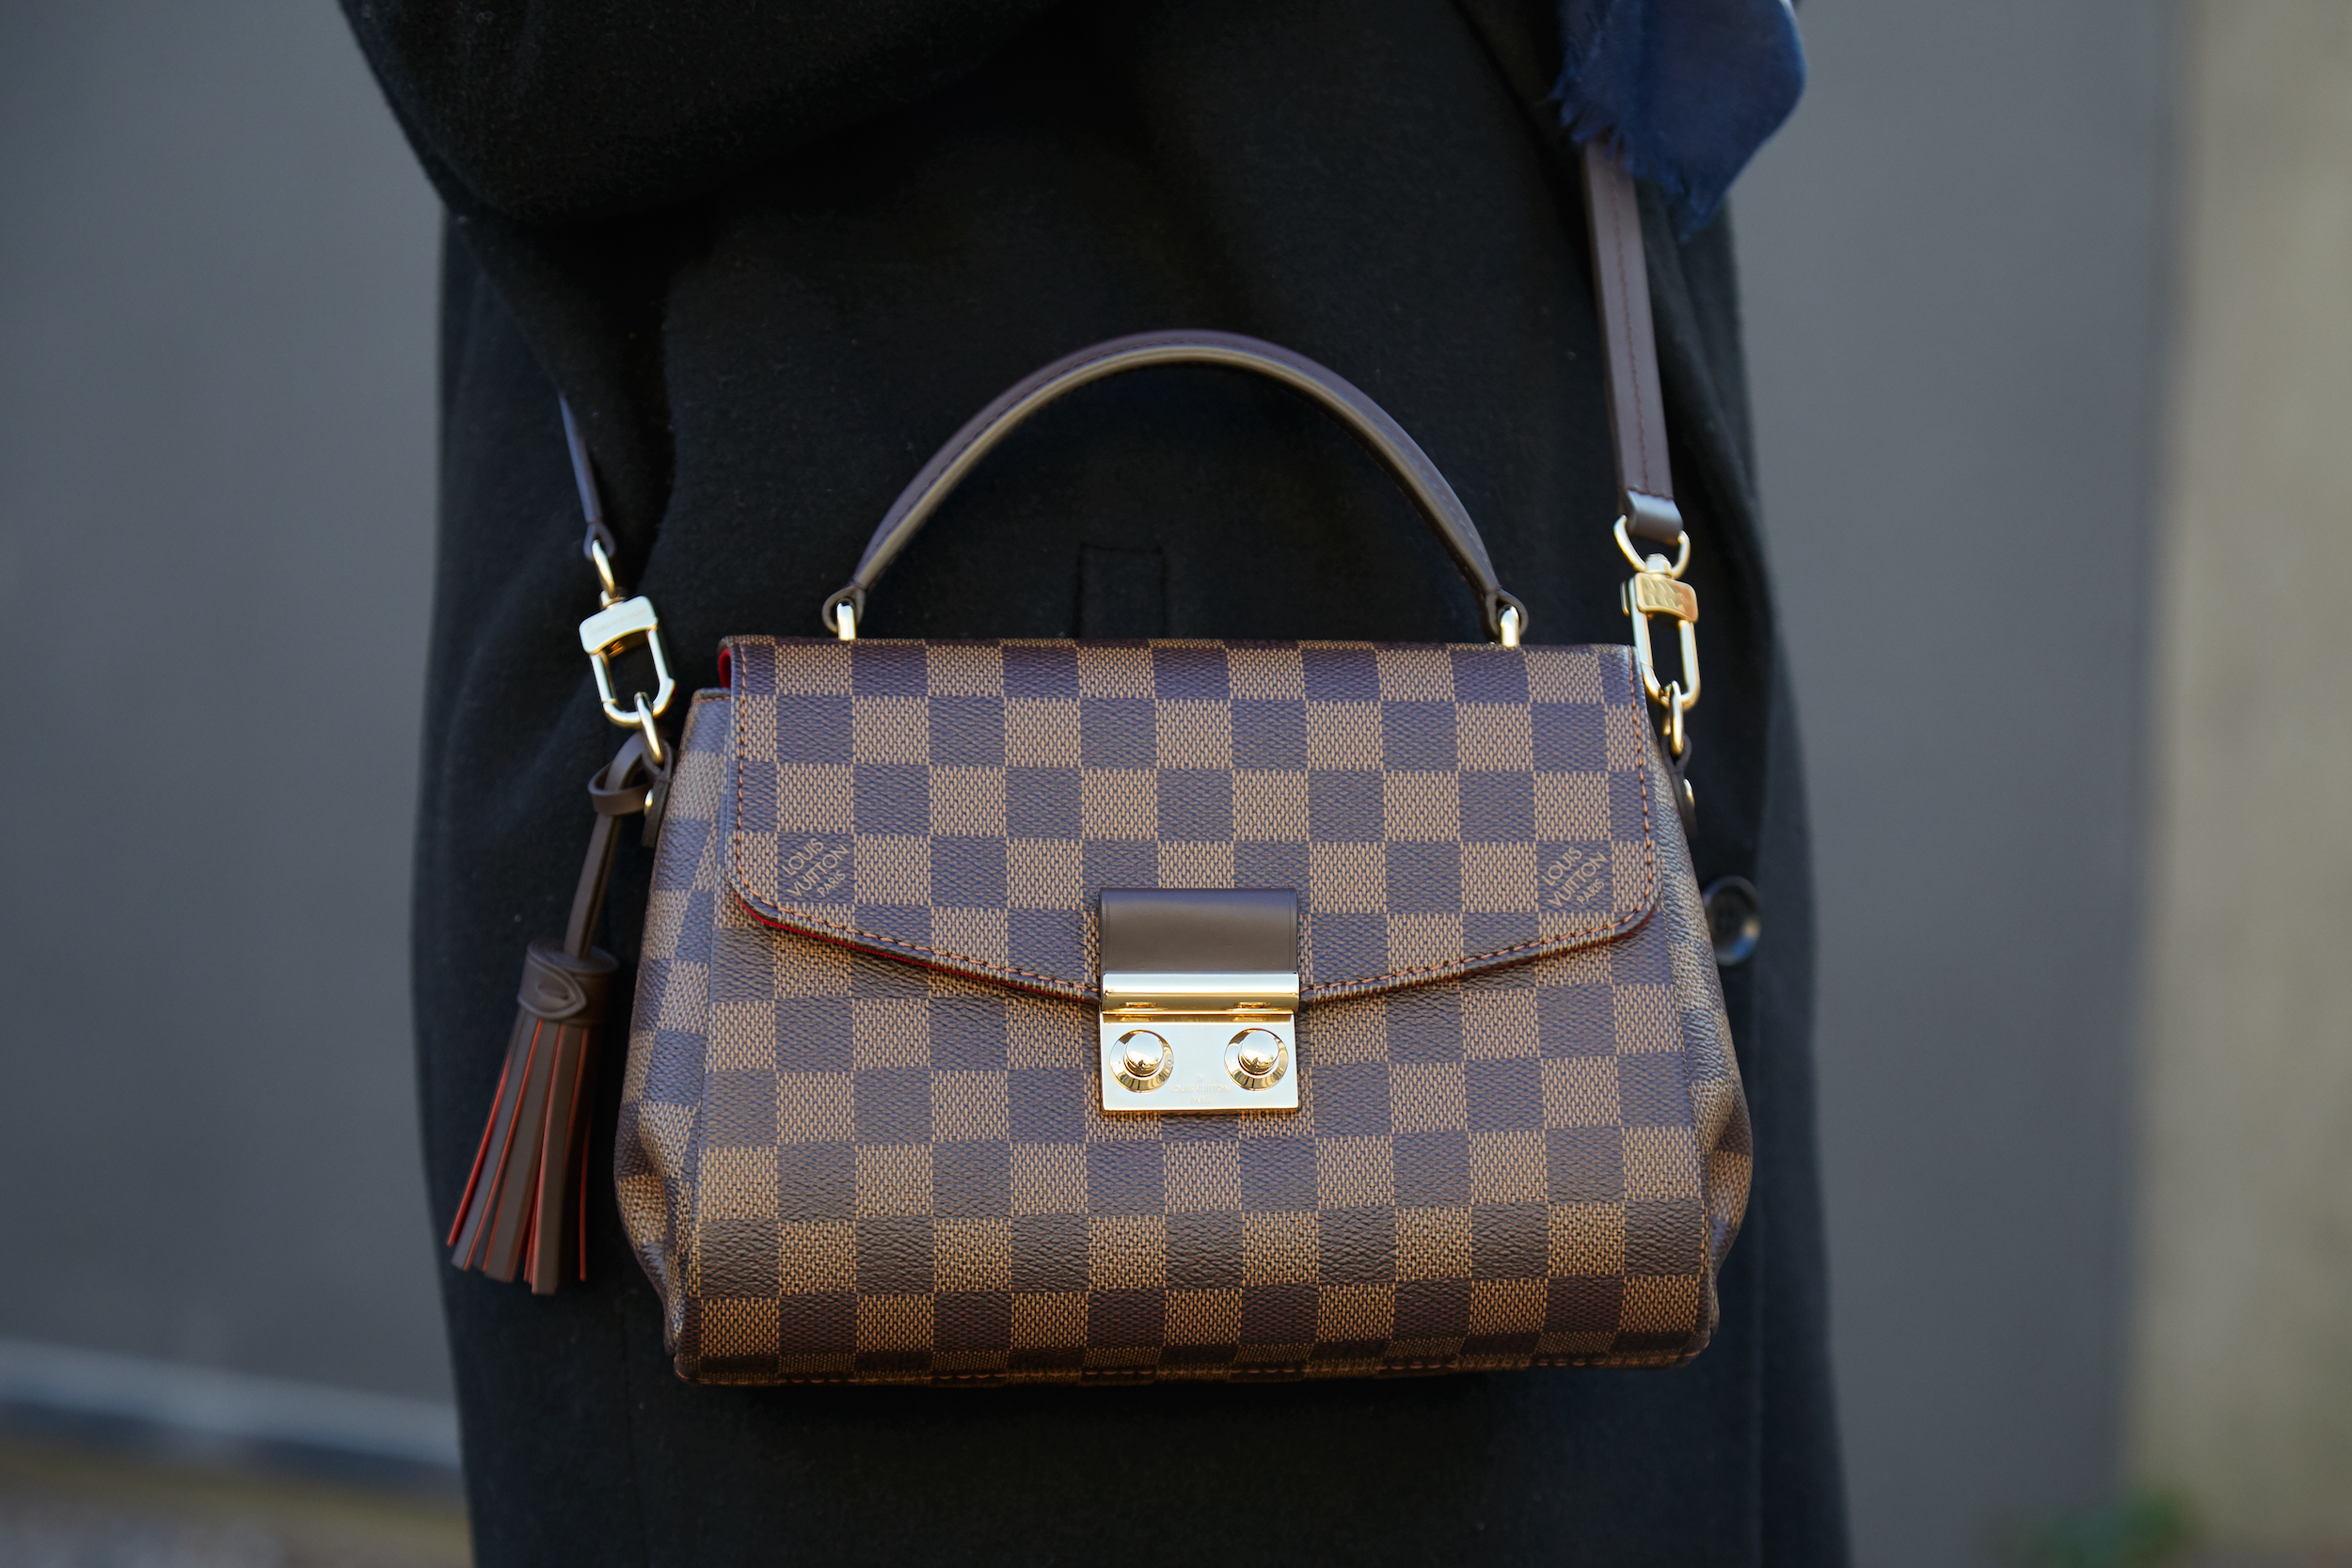 Do all Louis Vuitton products have serial numbers? - Quora